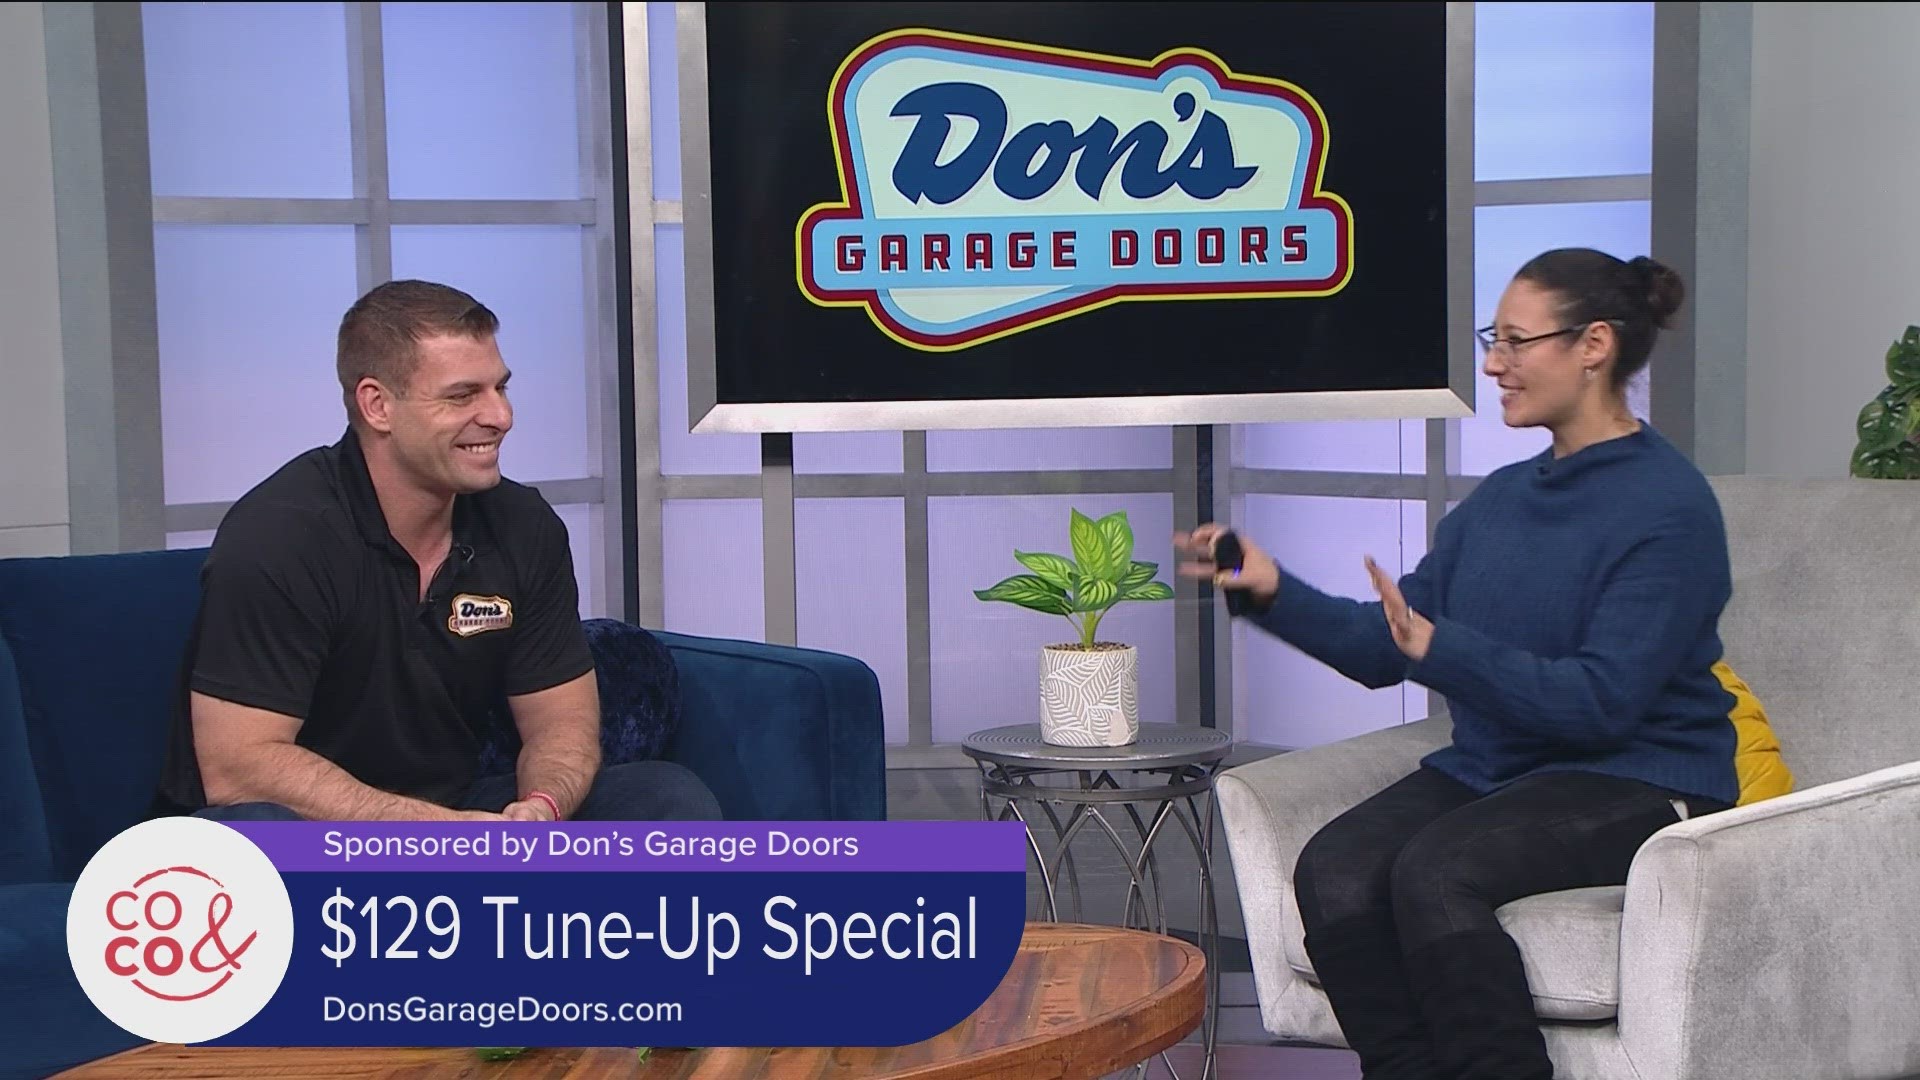 Don's offers same-day repair, installation and service. They also have a $129 tune-up special! Learn more and get started at DonsGarageDoors.com. **PAID CONTENT**